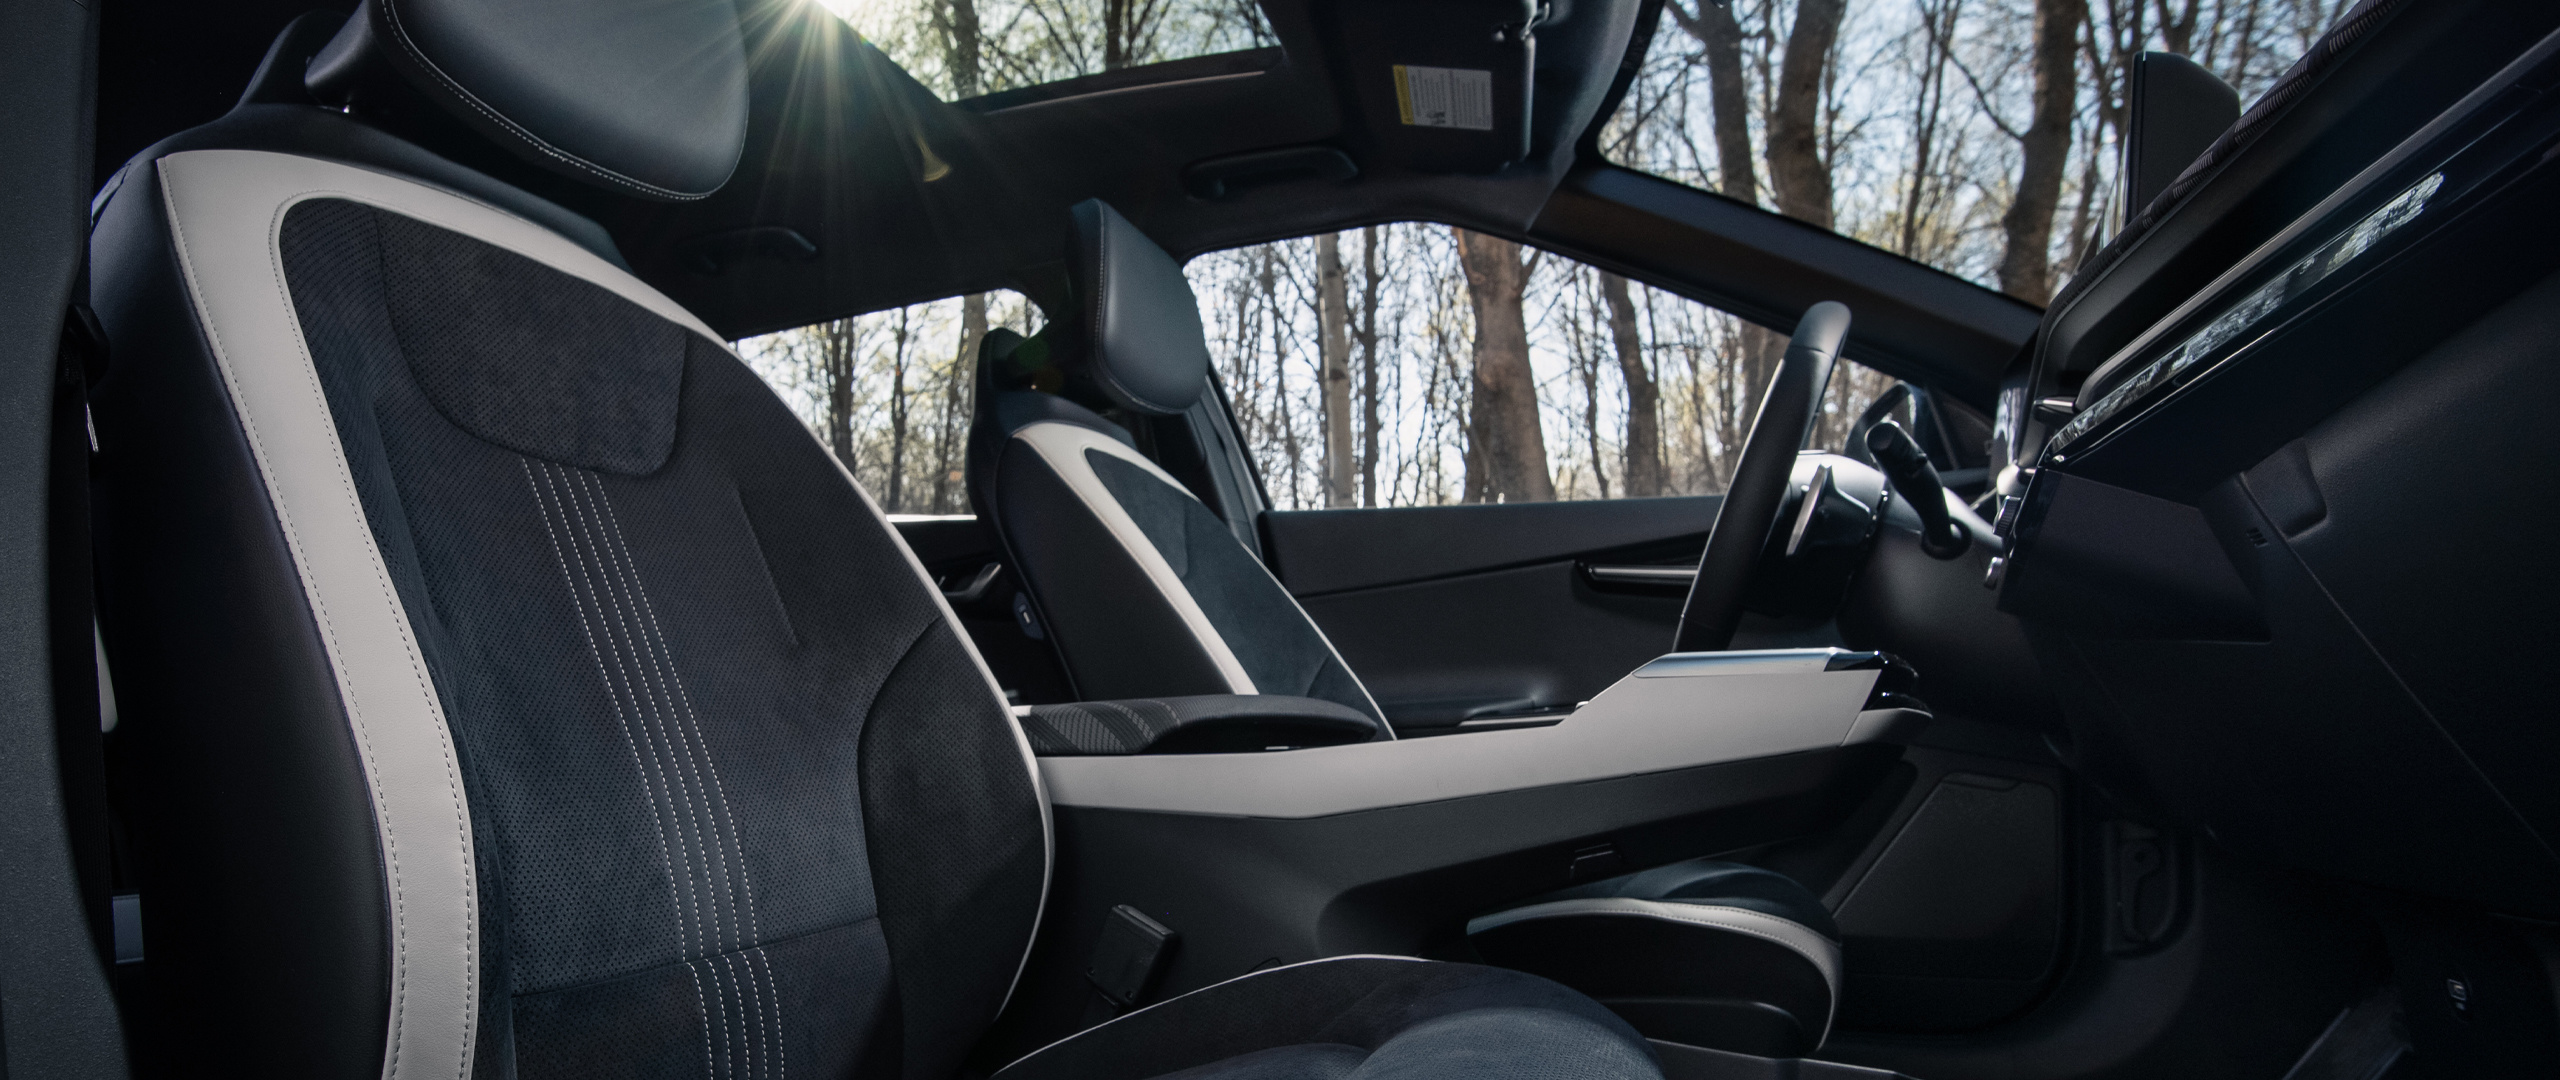 2022 Kia EV6 Interior Vegan Leather Seats And Other Sustainable Design Elements